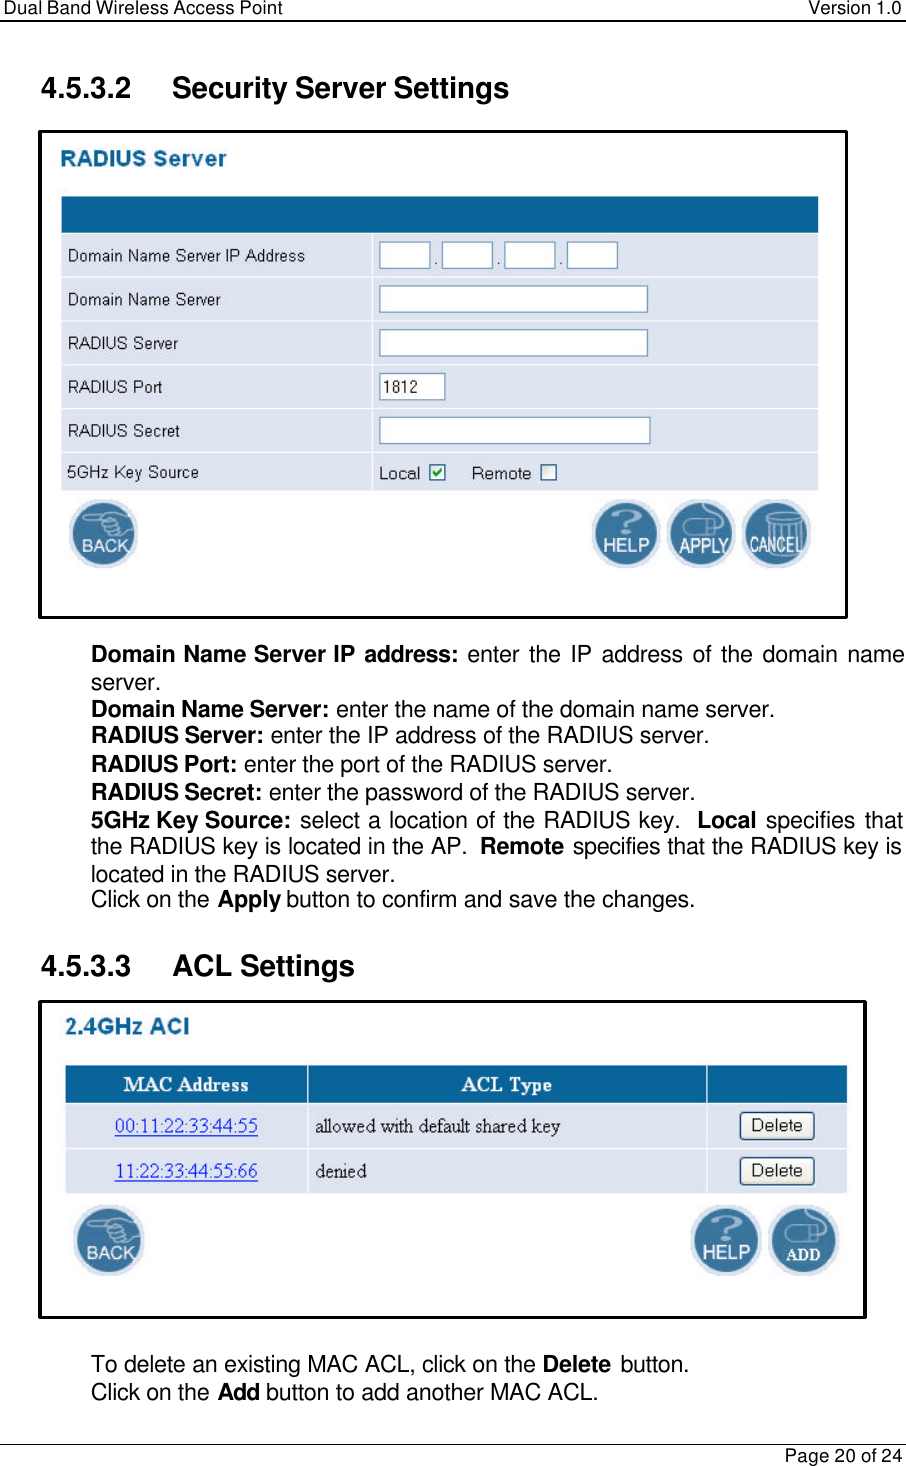 Dual Band Wireless Access Point Version 1.0Page 20 of 244.5.3.2 Security Server Settings Domain Name Server IP address:  enter the IP address of the domain nameserver. Domain Name Server: enter the name of the domain name server. RADIUS Server: enter the IP address of the RADIUS server. RADIUS Port: enter the port of the RADIUS server. RADIUS Secret: enter the password of the RADIUS server. 5GHz Key Source: select a location of the RADIUS key.  Local specifies thatthe RADIUS key is located in the AP.  Remote specifies that the RADIUS key islocated in the RADIUS server. Click on the Apply button to confirm and save the changes.4.5.3.3 ACL Settings To delete an existing MAC ACL, click on the Delete button. Click on the Add button to add another MAC ACL.